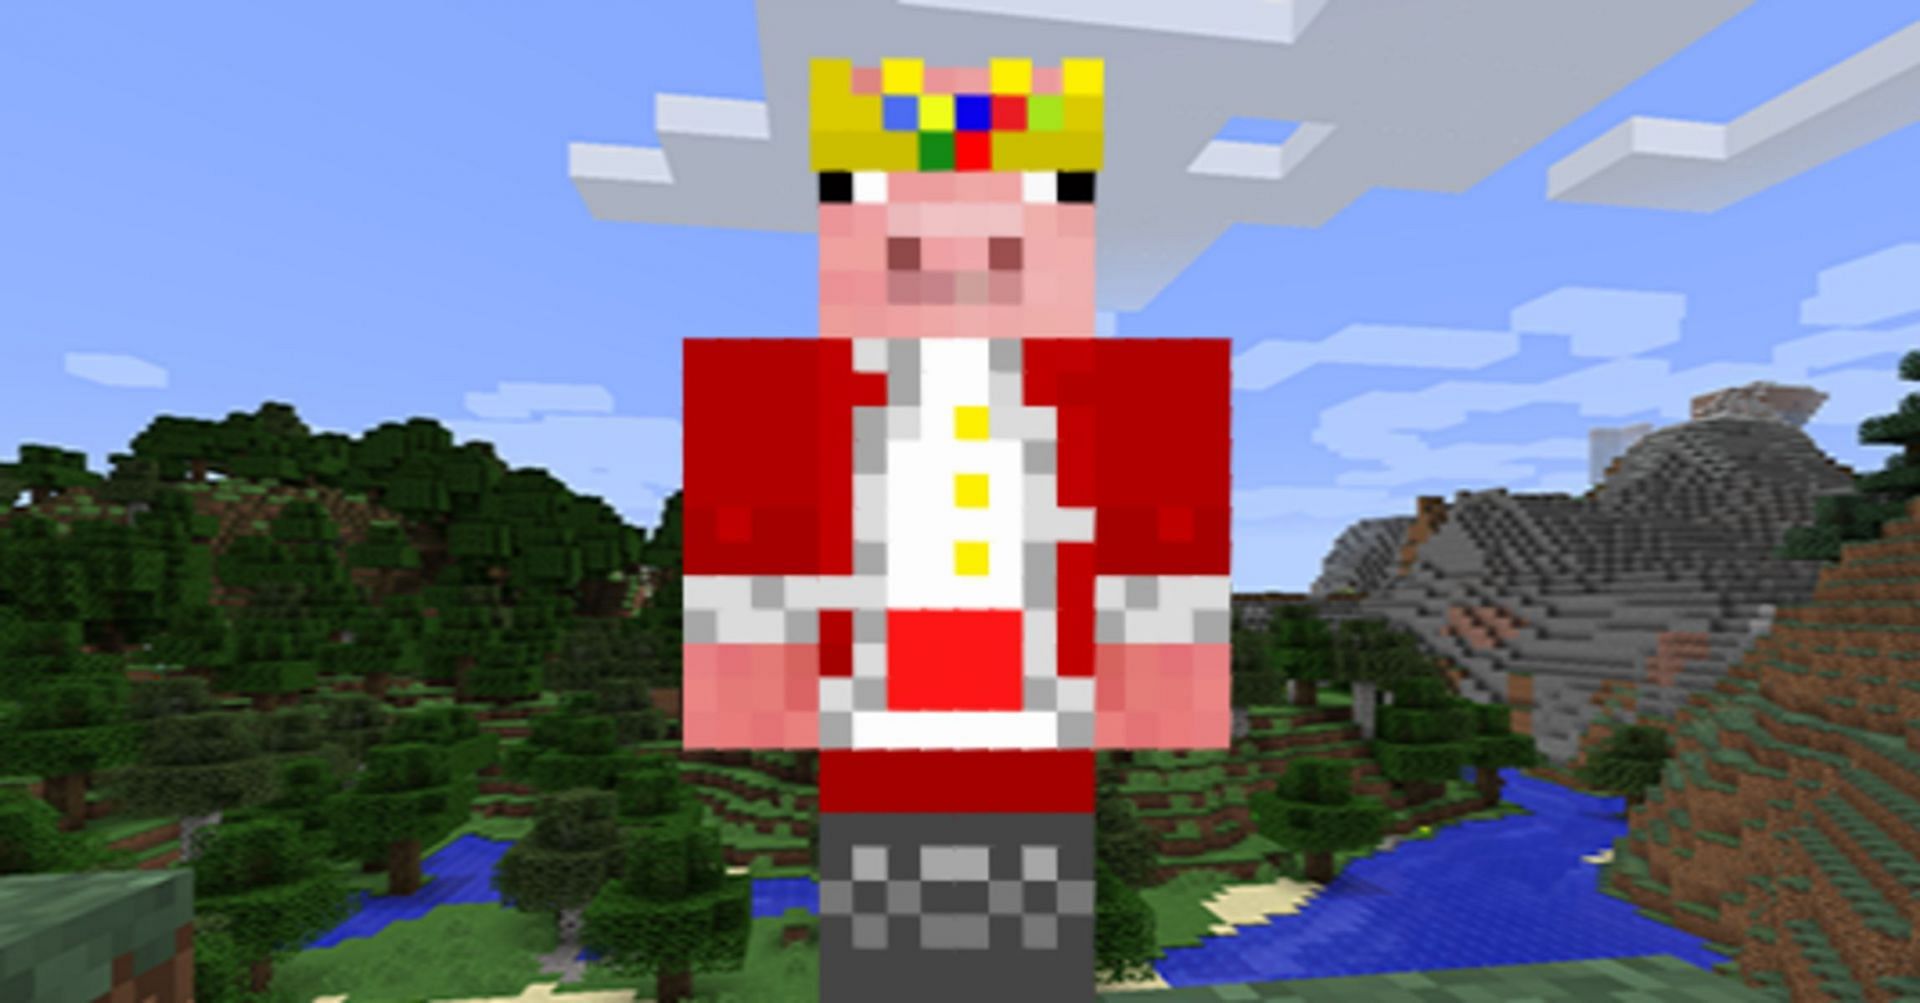 Many players have emulated the skin of the reputed content creator (Image via MinecraftSkins.net)